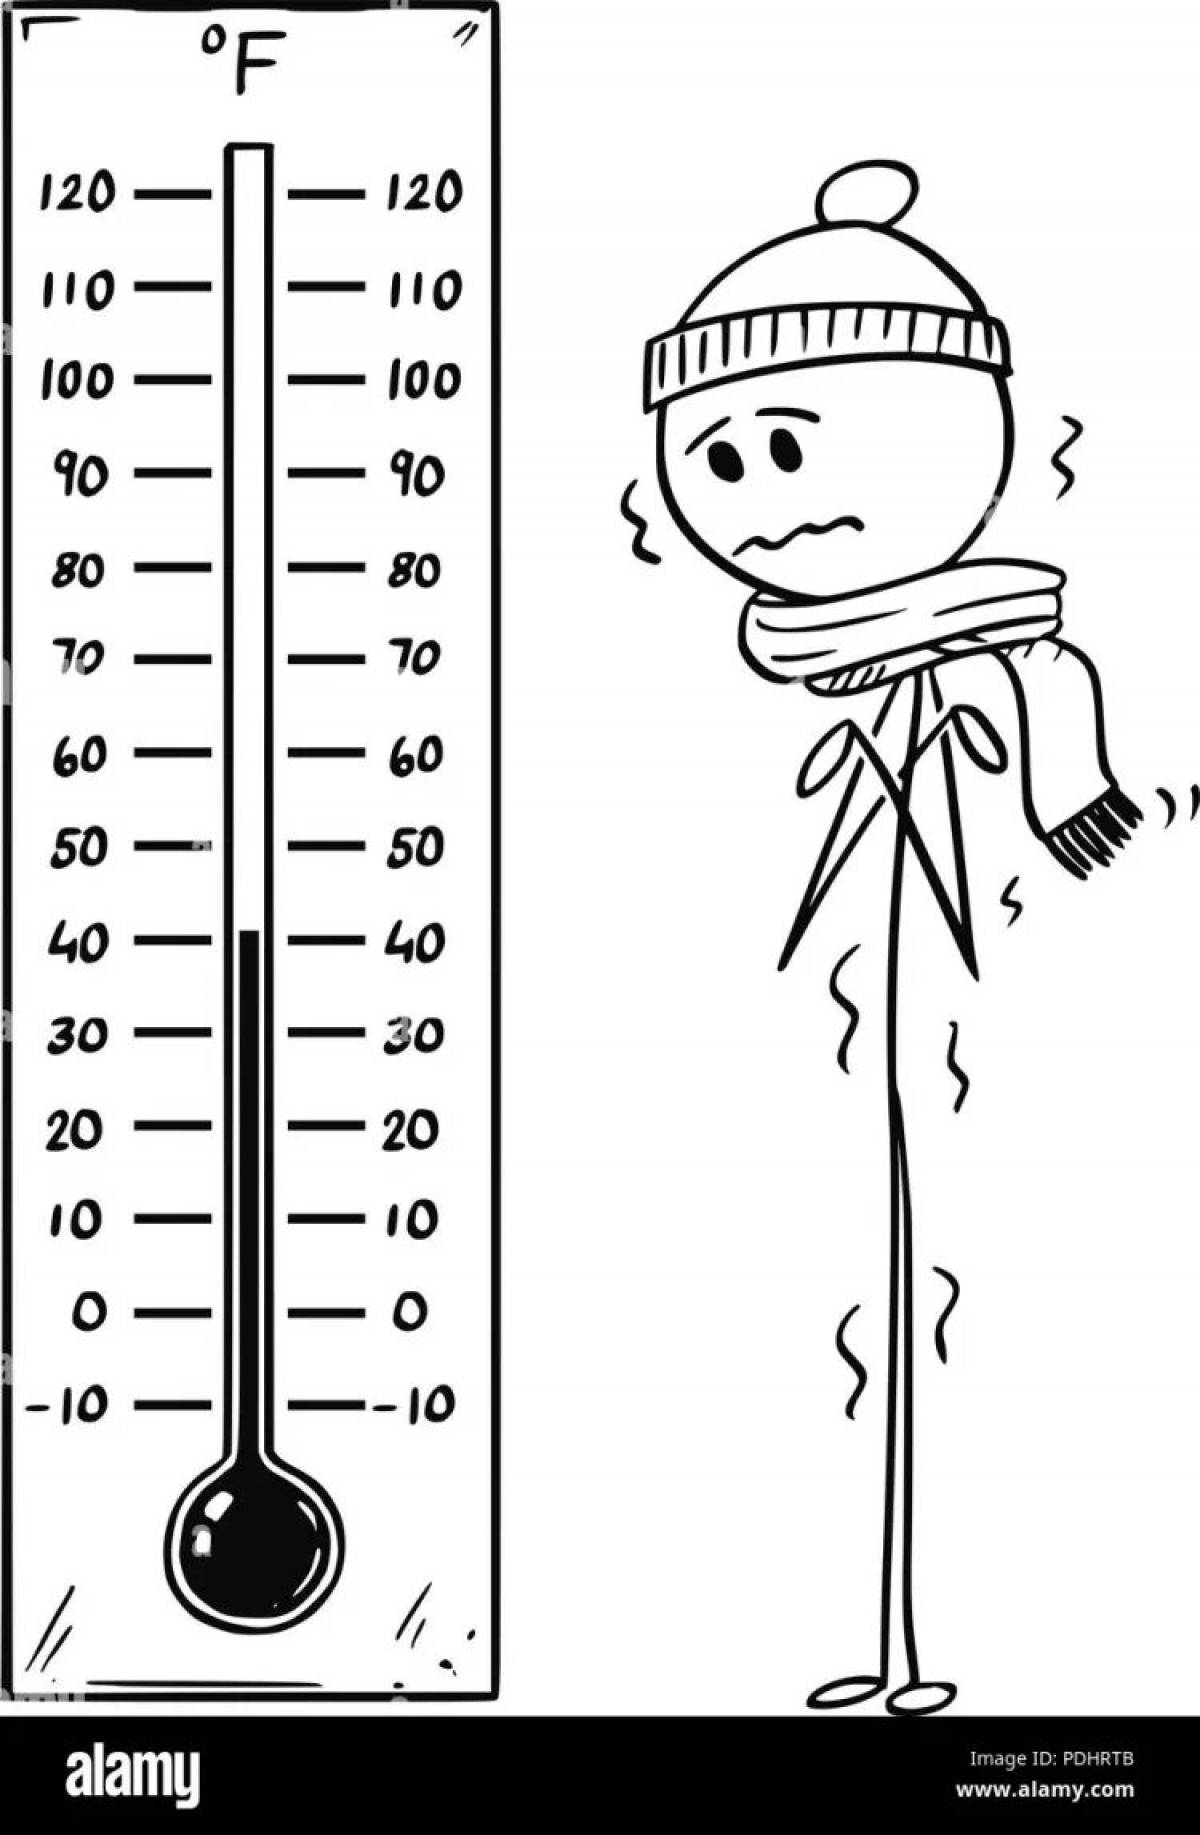 Child thermometer #1